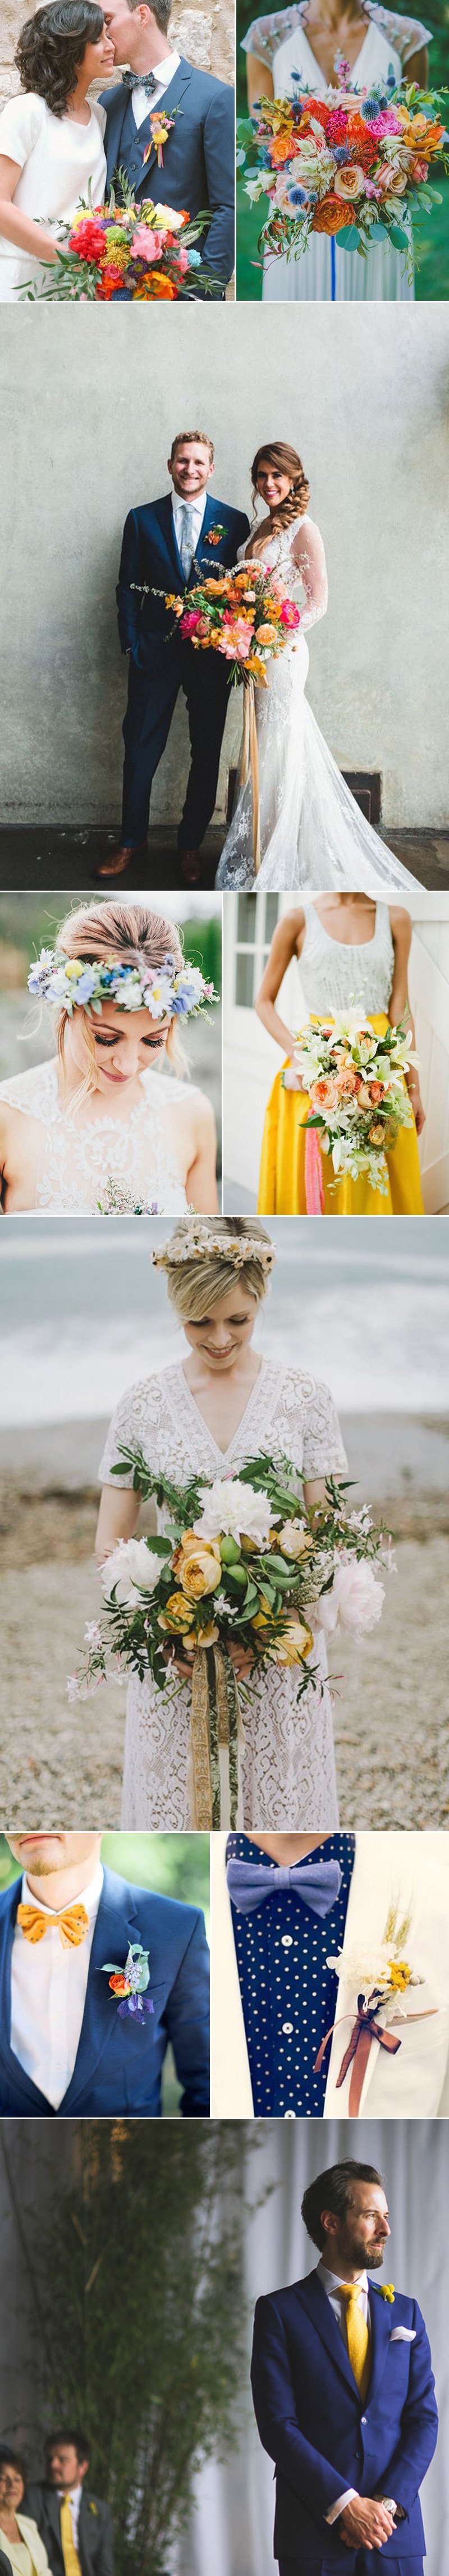 Spring Wedding Ideas in Yellows and Blues